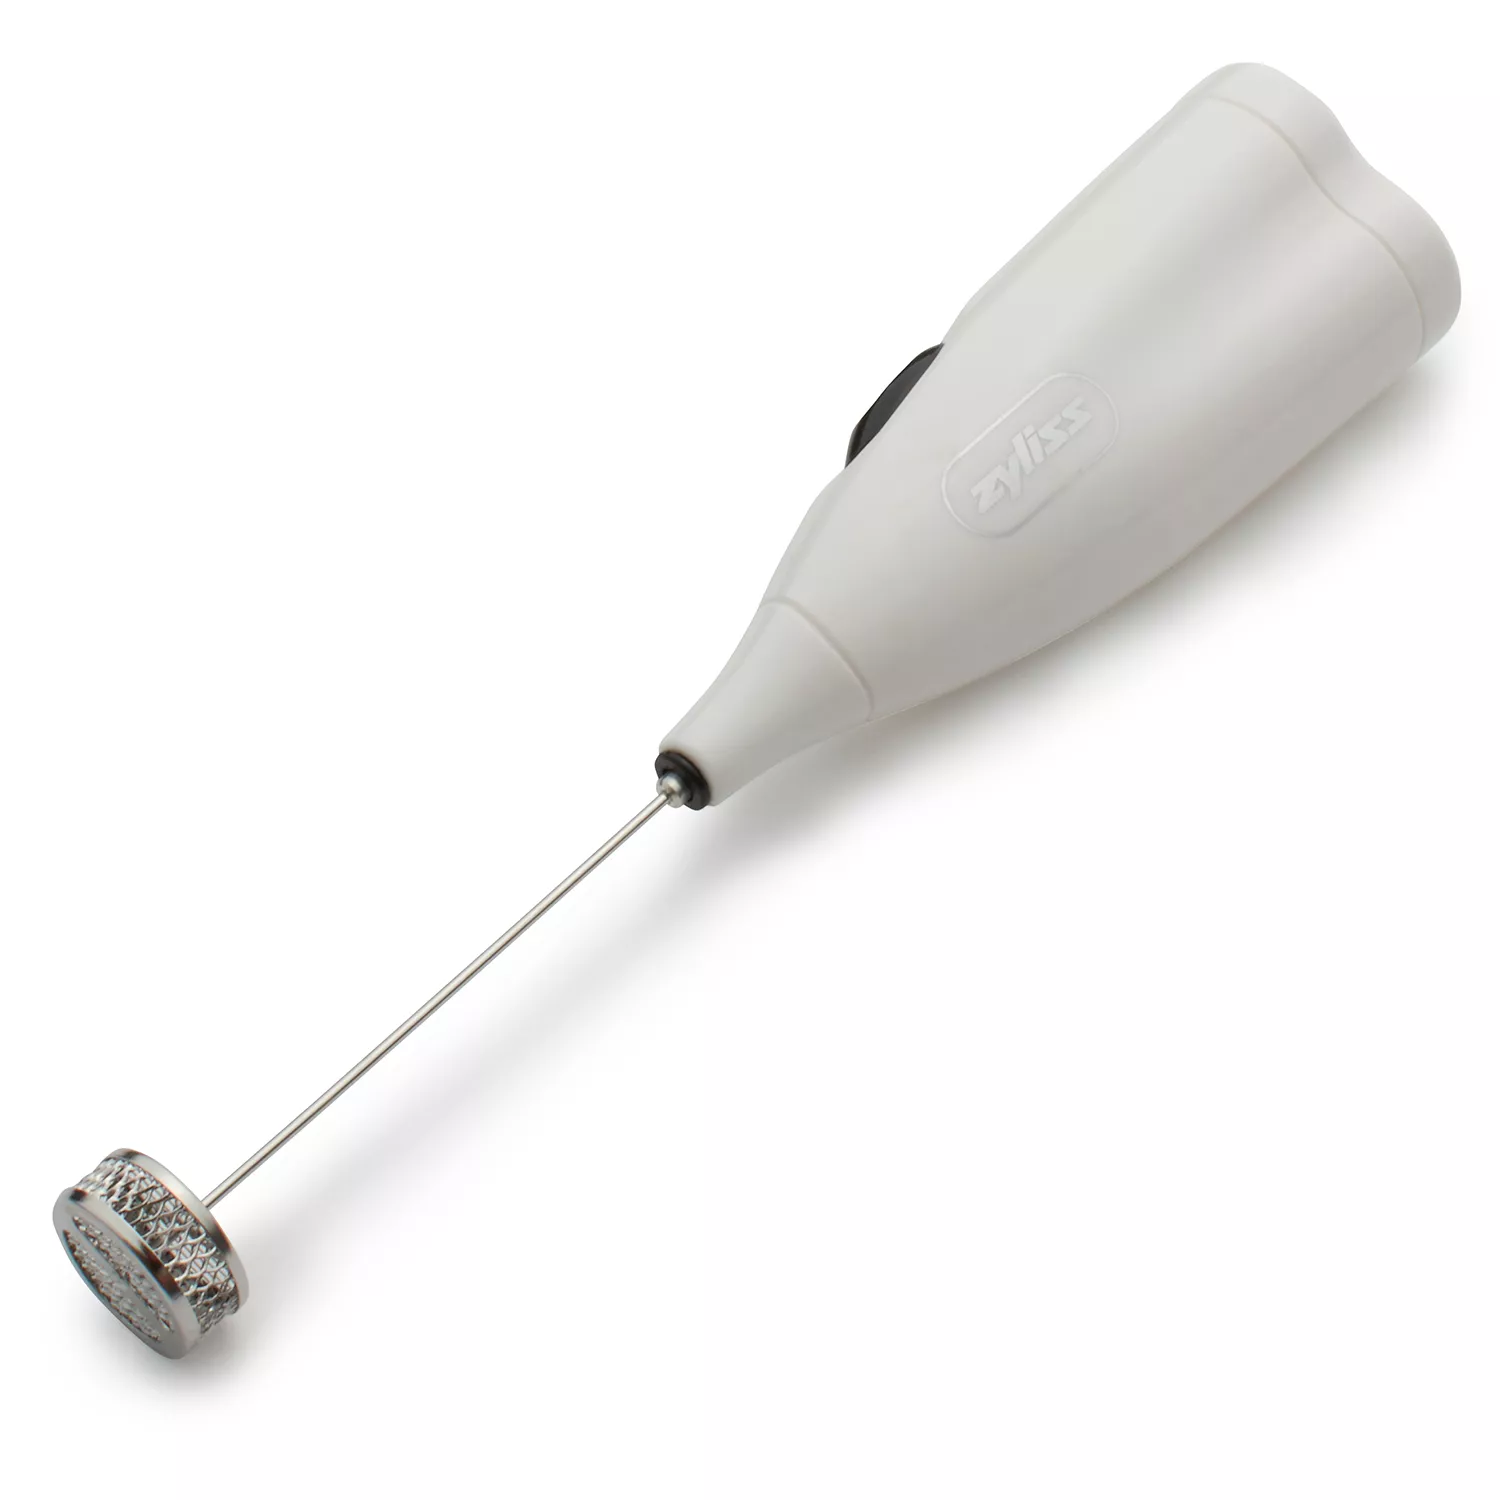 Zyliss Handheld Electric Milk Frother - Battery-Powered Frother for Coffee  - Create Hot or Cold Foam in Cappuccinos, Lattes, or Shakes - Perfect